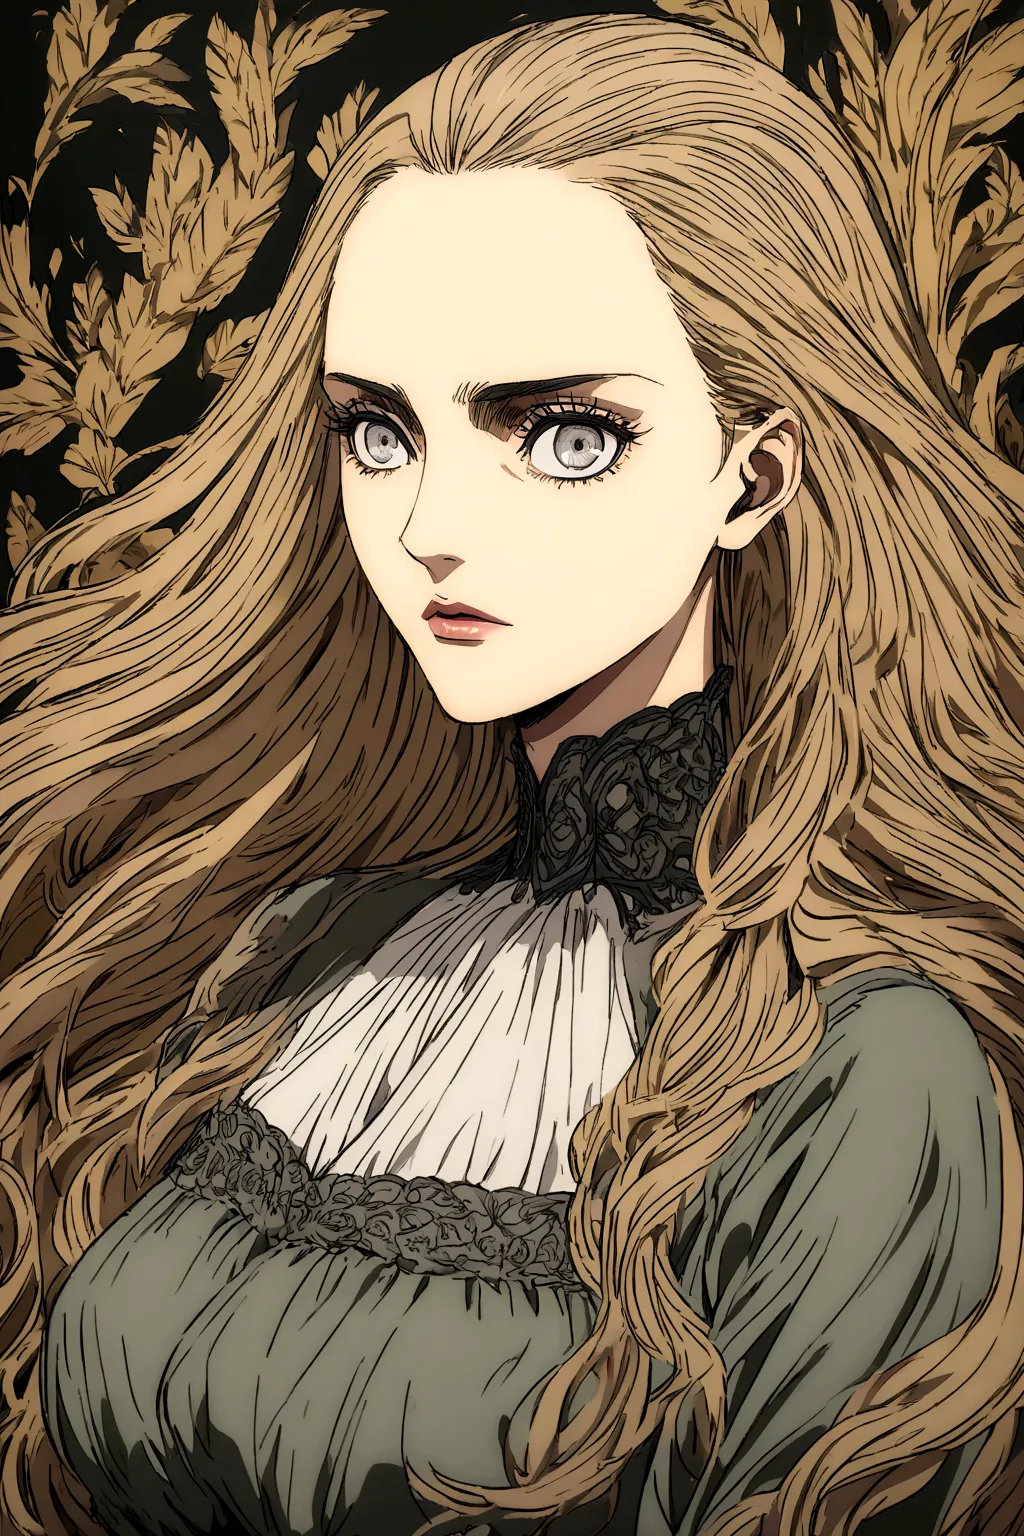 Attack on Titan anime style, woman with ginger wavy long hair, grey eyes. She wears a black high-necked blouse